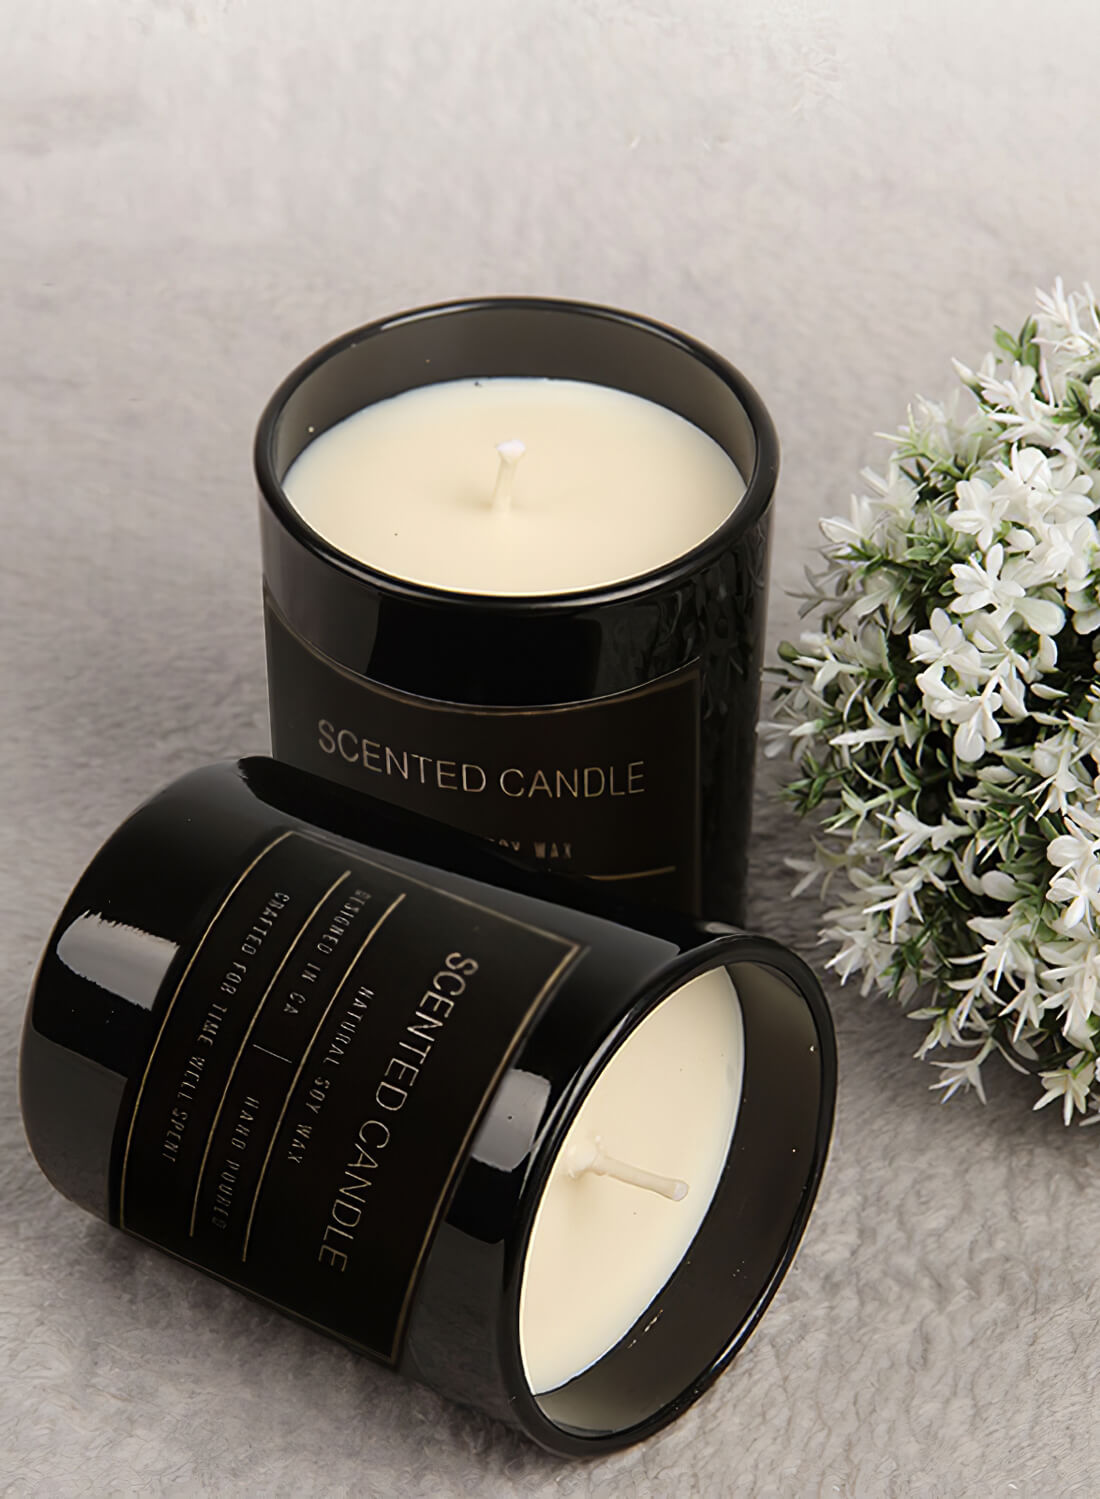 Scented Candles, Scented Soy Jar Candle 53g